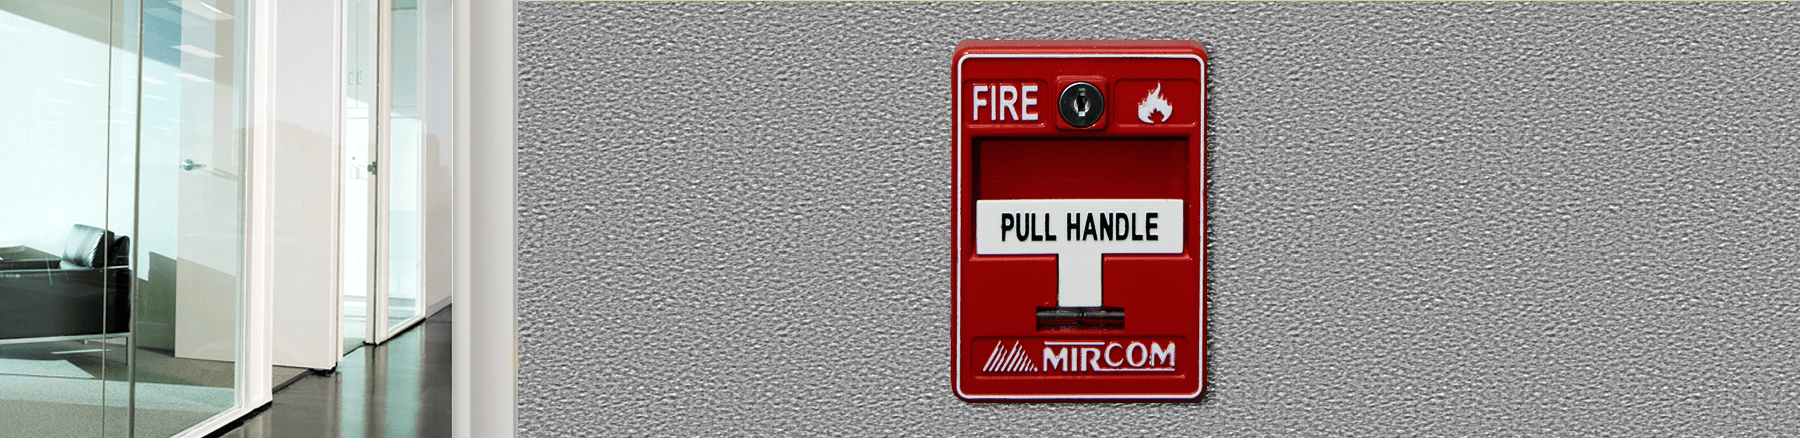 Choose from the best selection of commercial fire systems when you choose Custom Security.